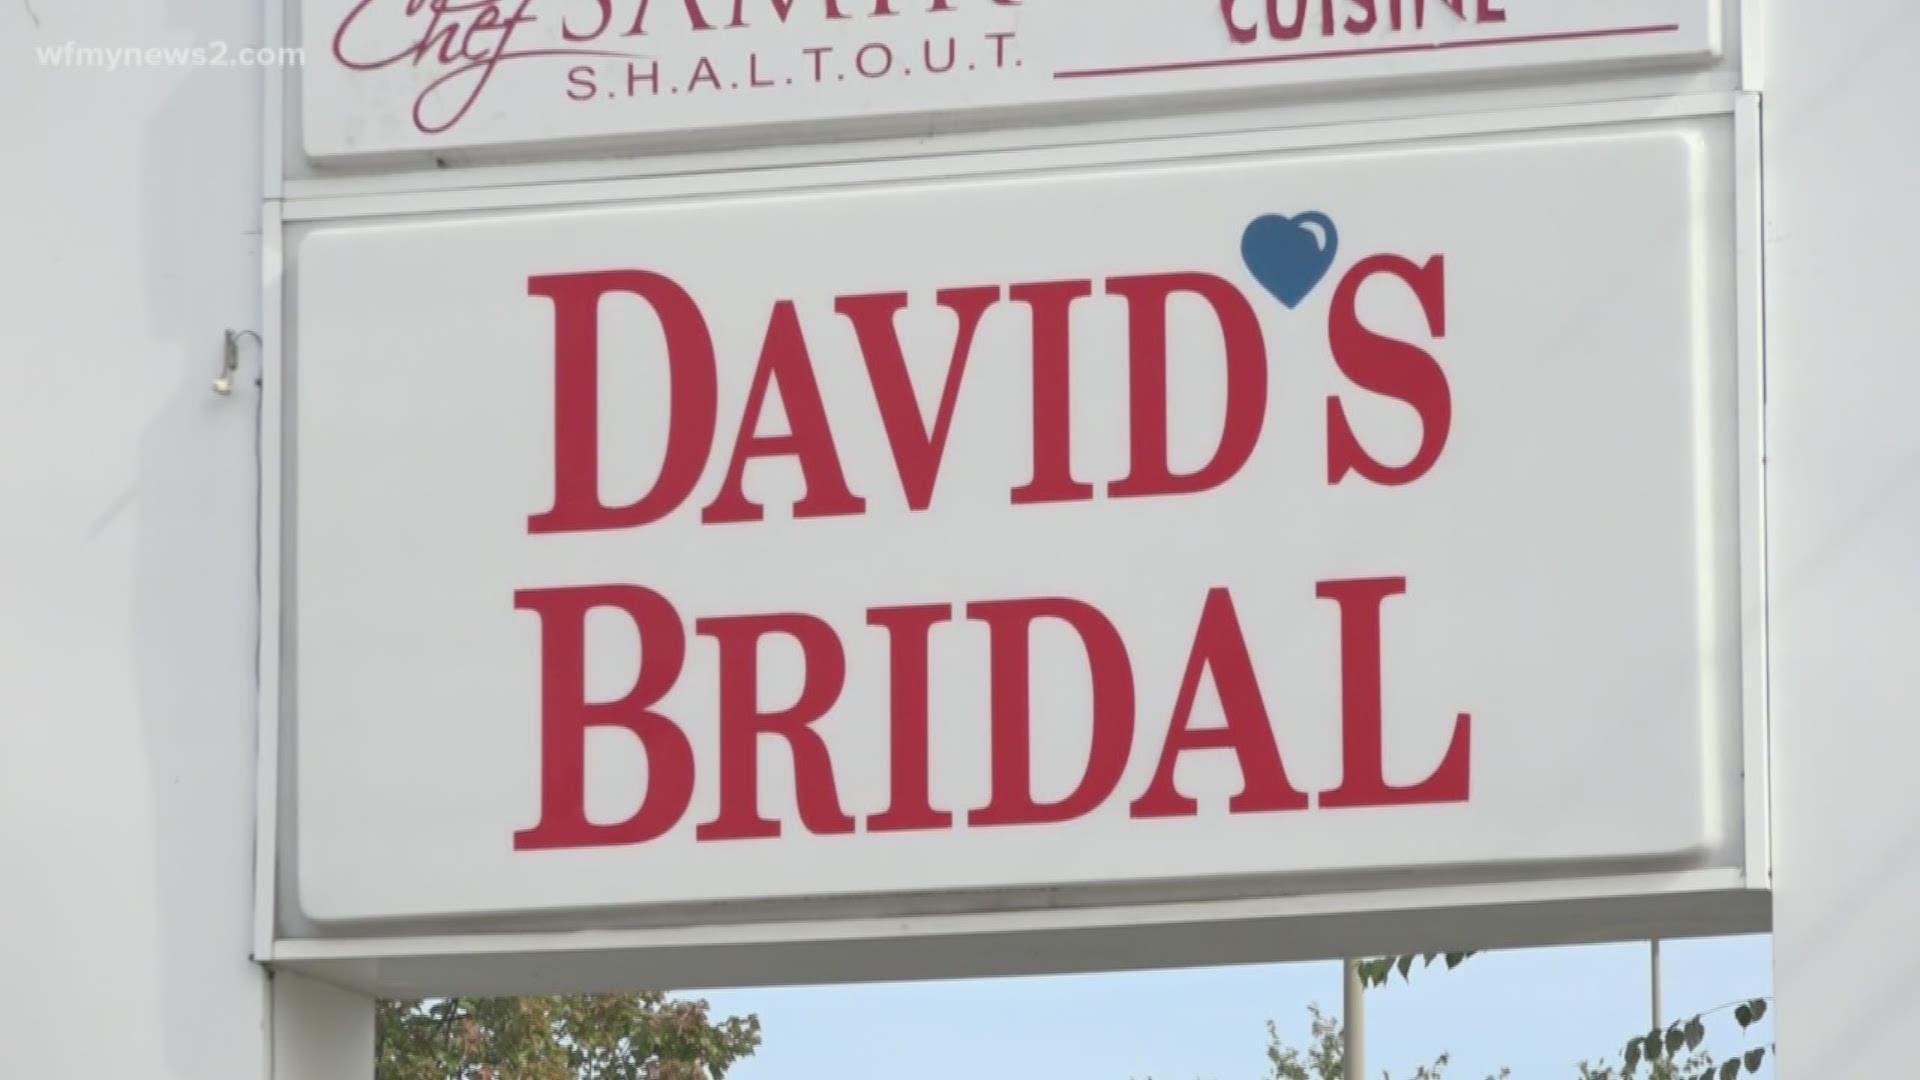 Happily ever after could be turning into a financial disaster for a popular chain, to buy wedding dresses. David's Bridal.